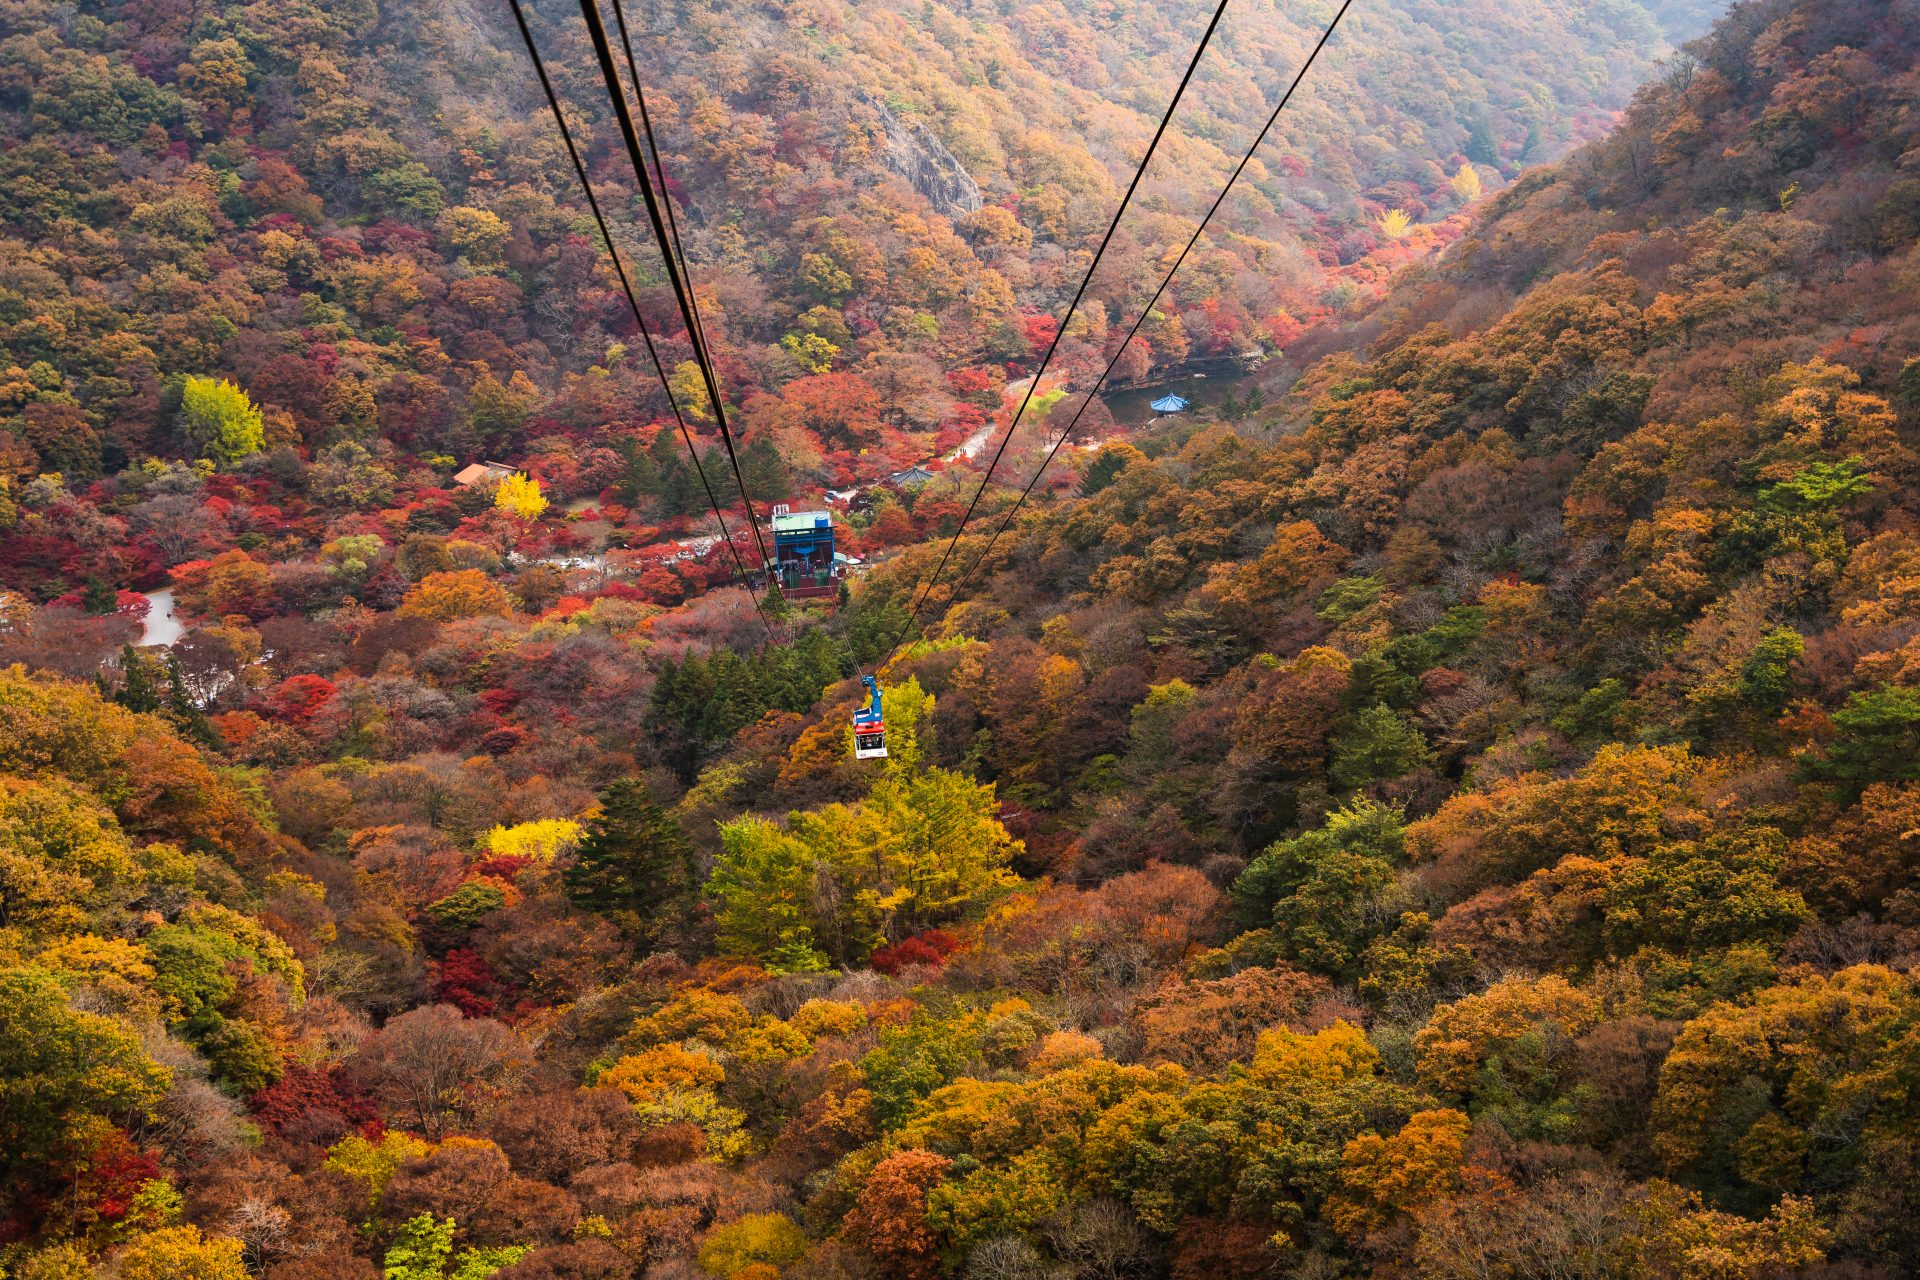 <p>If you are not confident in your physical strength, take the ropeway to the observation deck and enjoy the panoramic view of autumn leaves. Also, azaleas and cherry blossoms are in full bloom in spring.</p> <p><a href="https://www.msn.com/en-us/channel/source/Showbizz%20Daily%20English/sr-vid-w8hcuhvu3f8qr5wn5rk8xhsu5x8irqrgtxcypg4uxvn7tq9vkkfa?cvid=cddbc5c4fc9748a196a59c4cb5f3d12a&ei=7" rel="noopener">Follow Showbizz Daily to see the best photo galleries every day</a></p>